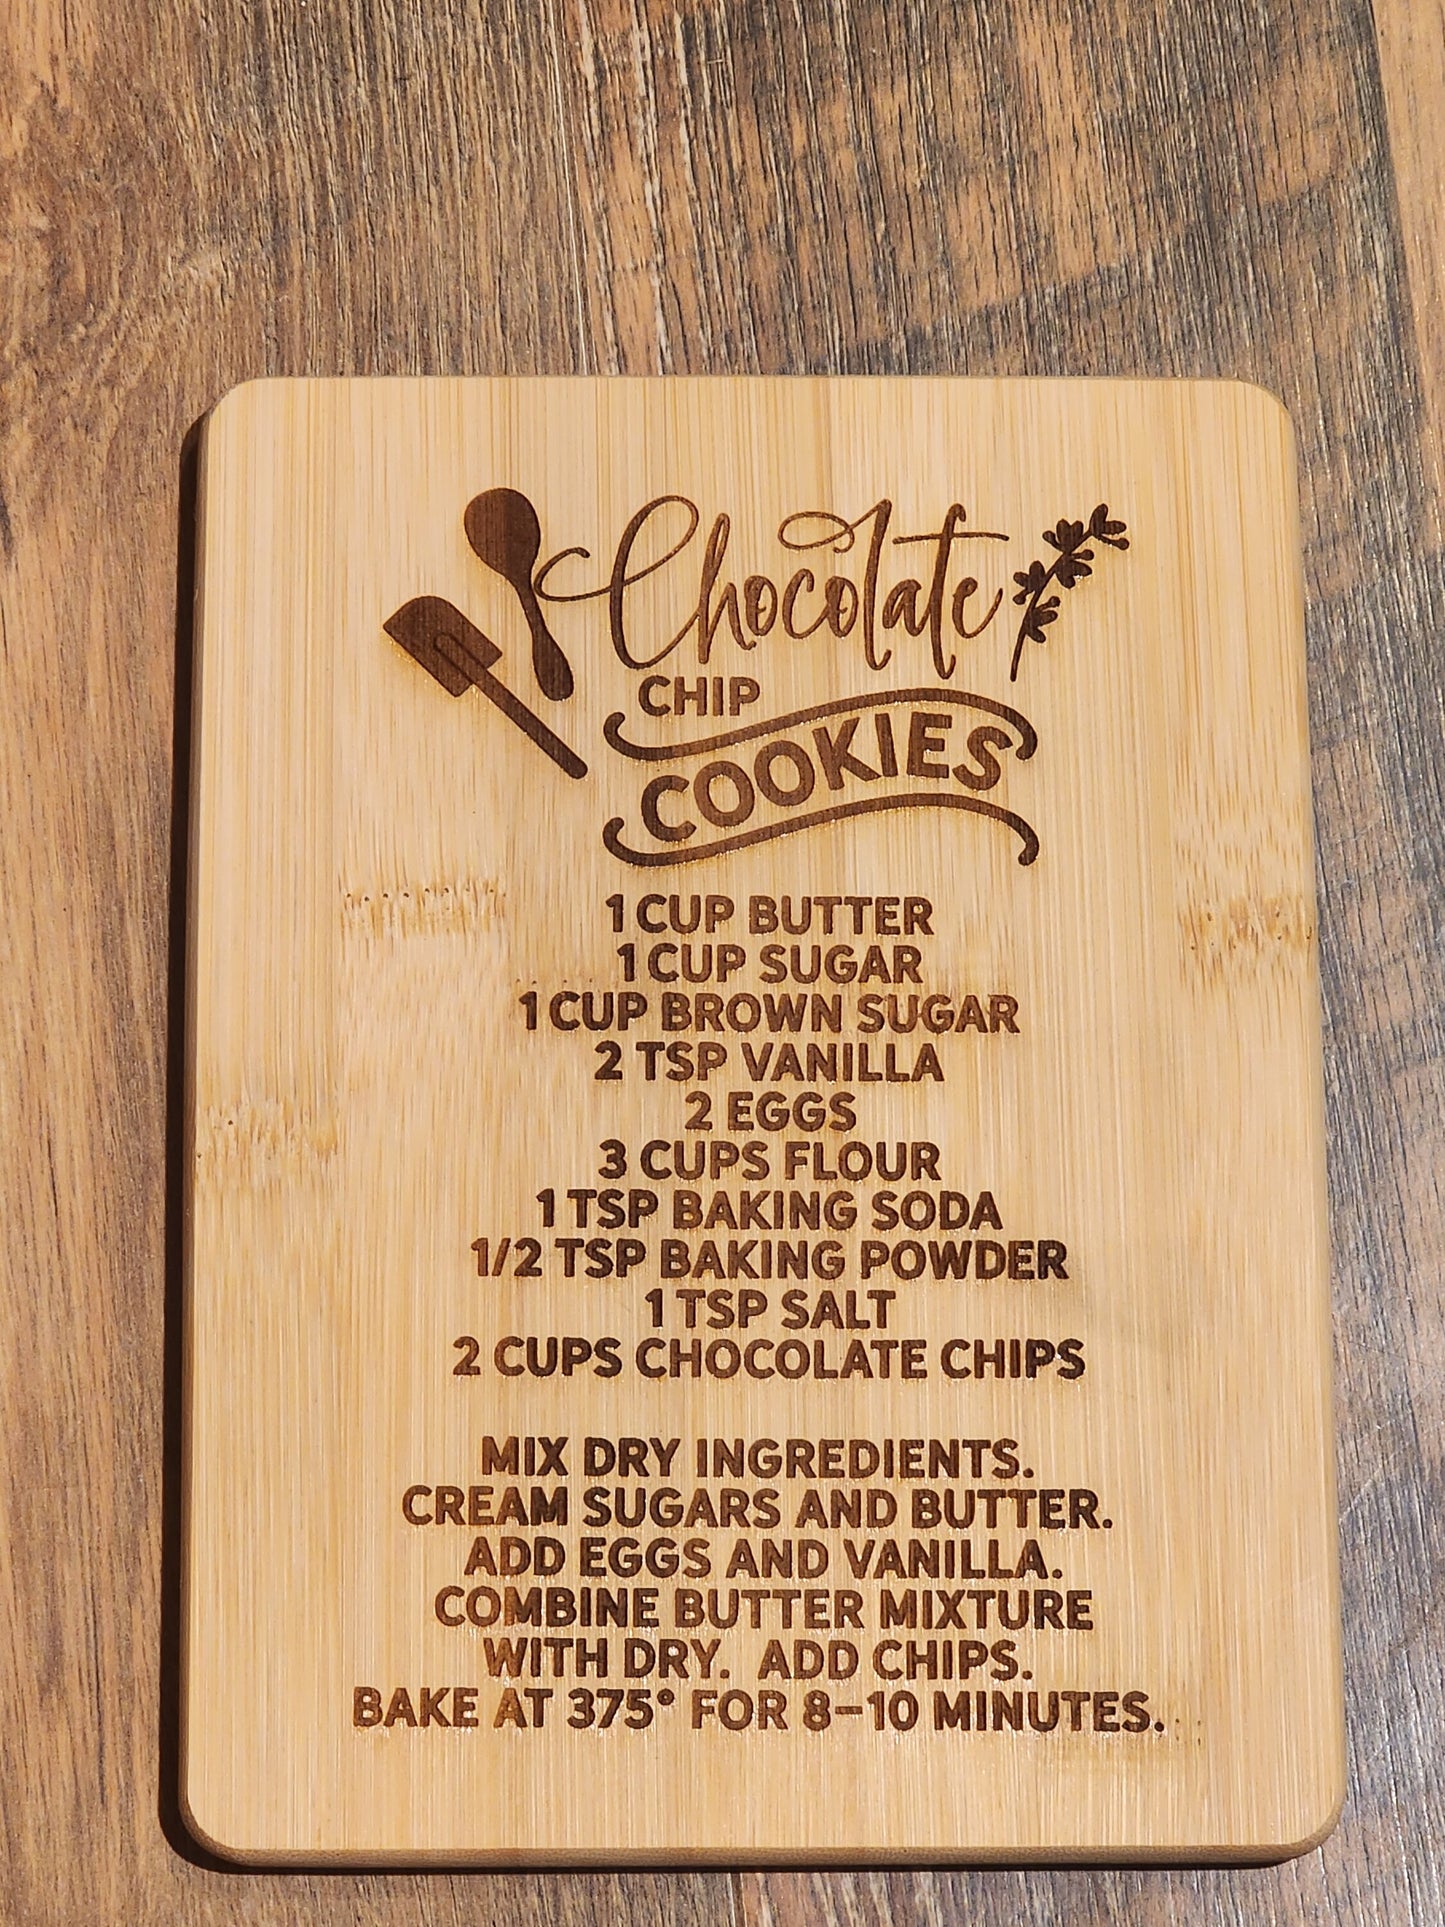 Chocolate Chip Cookies Recipe, country etched Bamboo Wood Cutting Board  - 8.75 x 6.875 inches